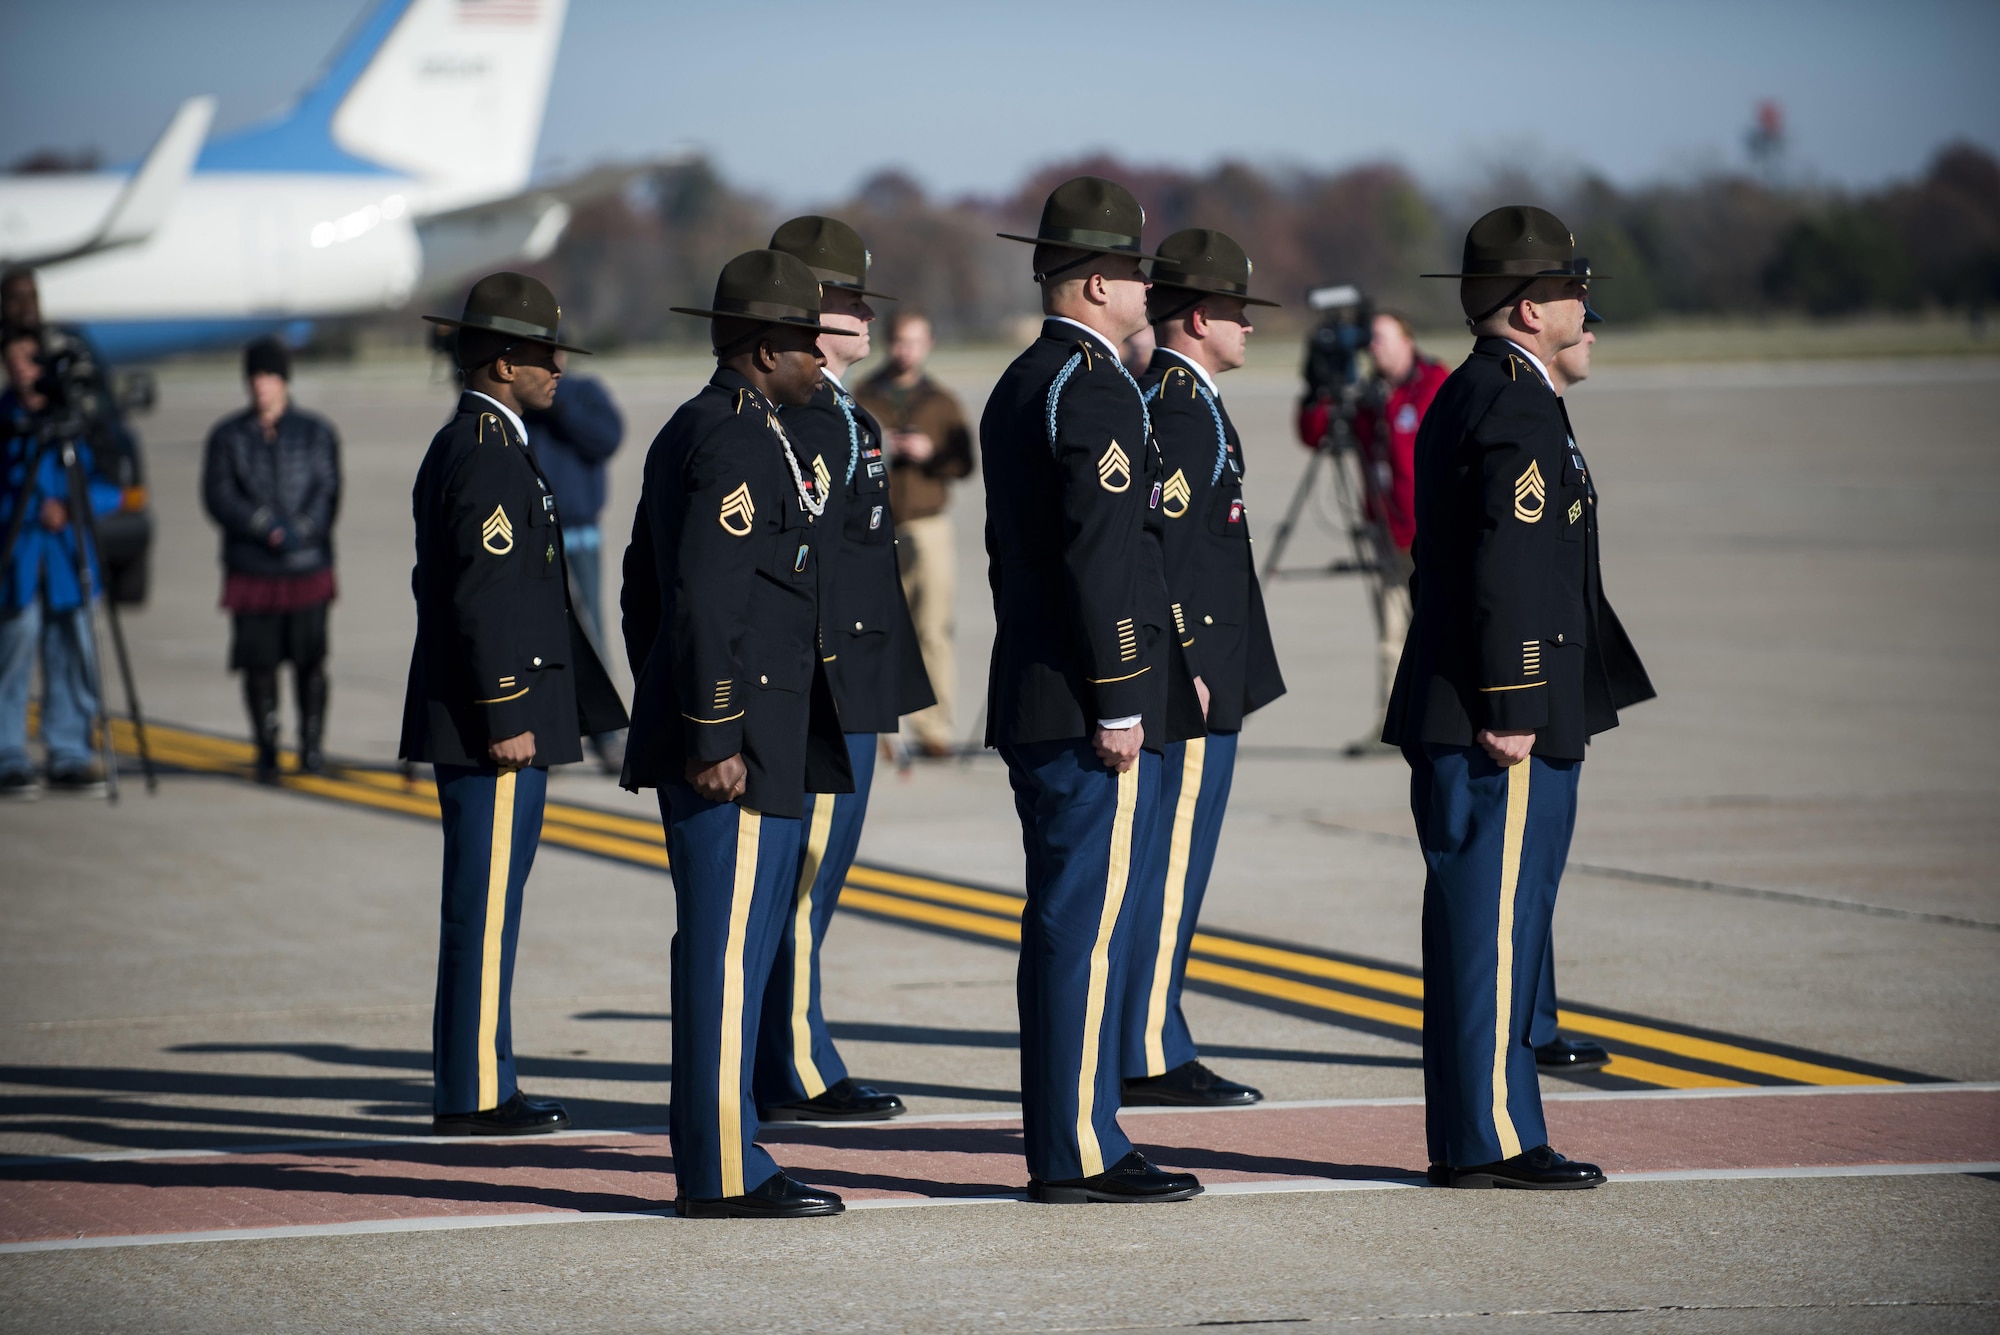 Members of the Fort Leonard Wood honor guard stand in formation during a dignified transfer ceremony for Pfc. Tyler Iubelt 21 Nov., 2016, at Scott Air Force Base, Illinois. Iubelt passed away on 12 Nov. while deployed to Bagram, Afghanistan. (U.S. Air Force photo by Staff Sgt. Clayton Lenhardt)